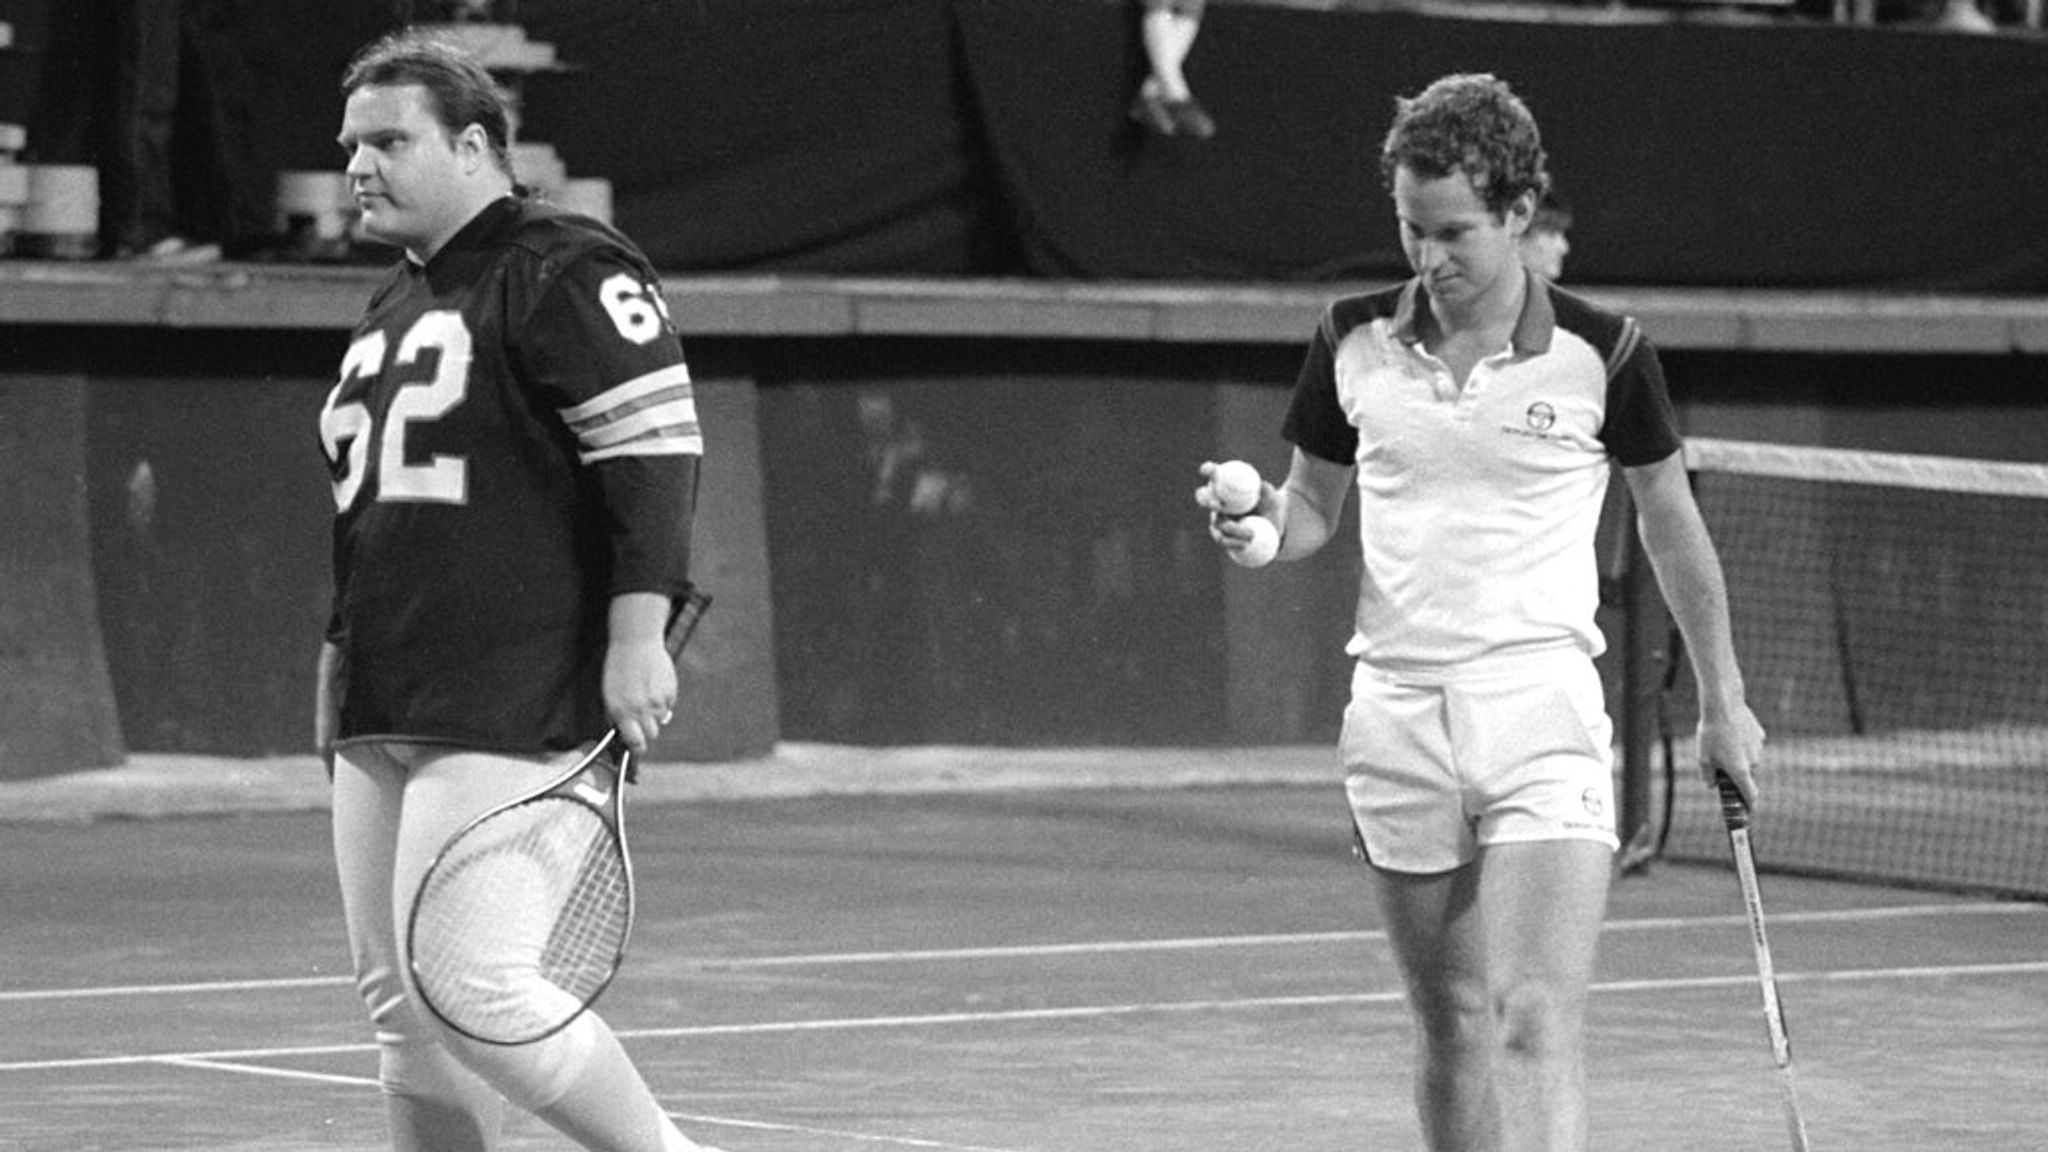 1982: Meat Loaf plays tennis in New York with legendary player John McEnroe. Pic: AP